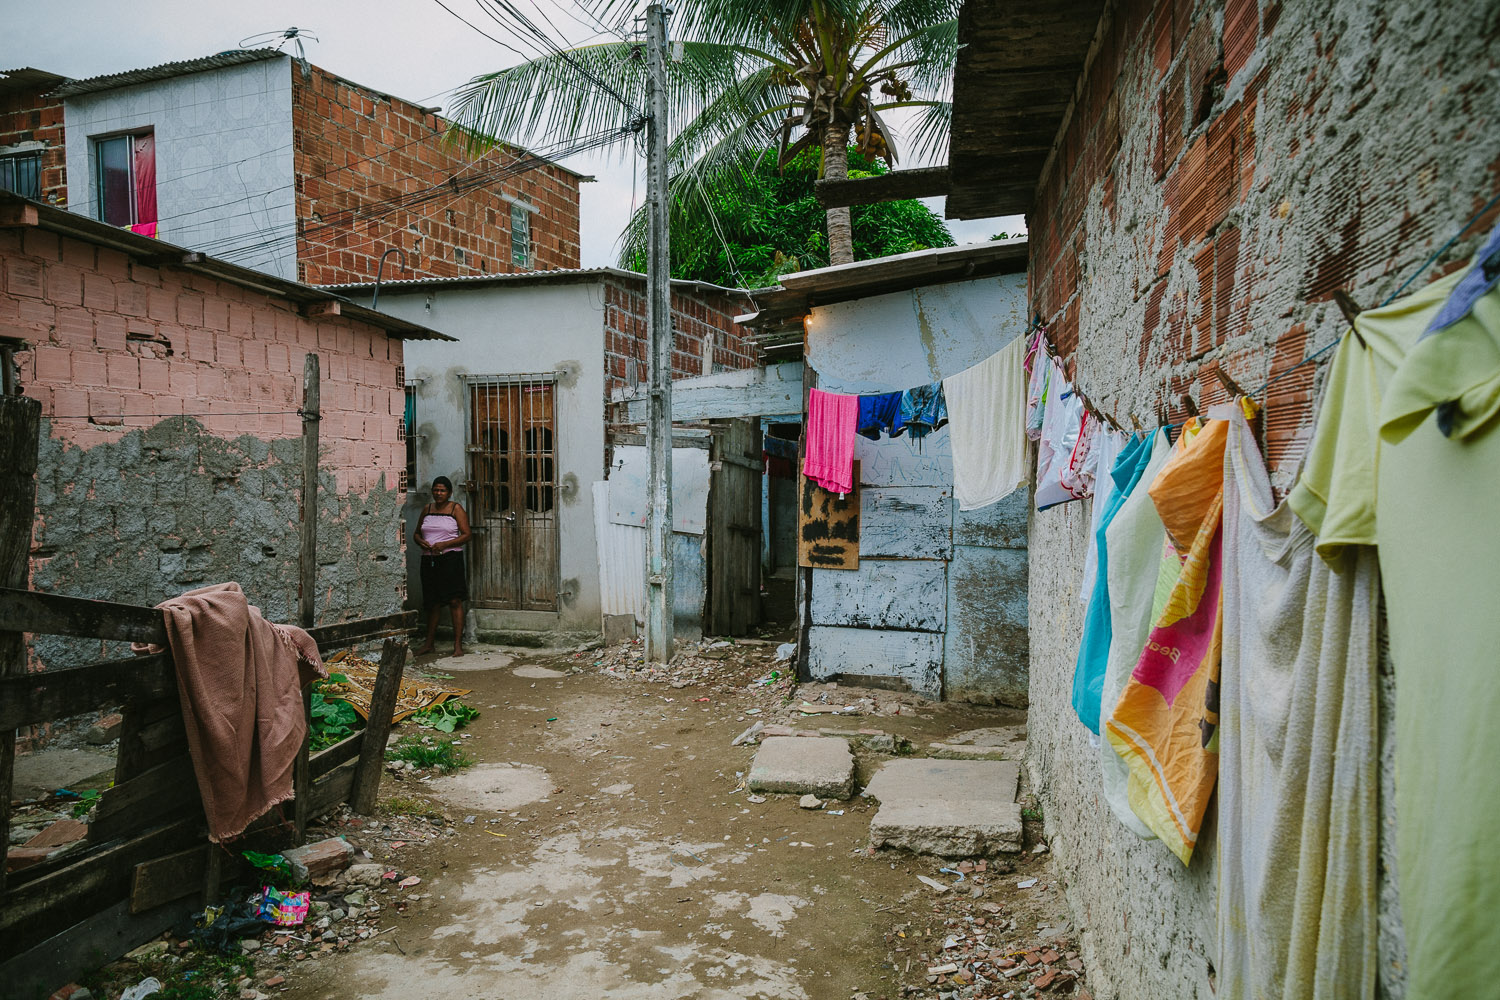   The neighborhood where Emidio lives is a very very poor section of the city with substantial poverty and high crime rate. Many of the houses are nothing more than pieces of thin wood and tin. In spite of this, many friendly people live there and ar